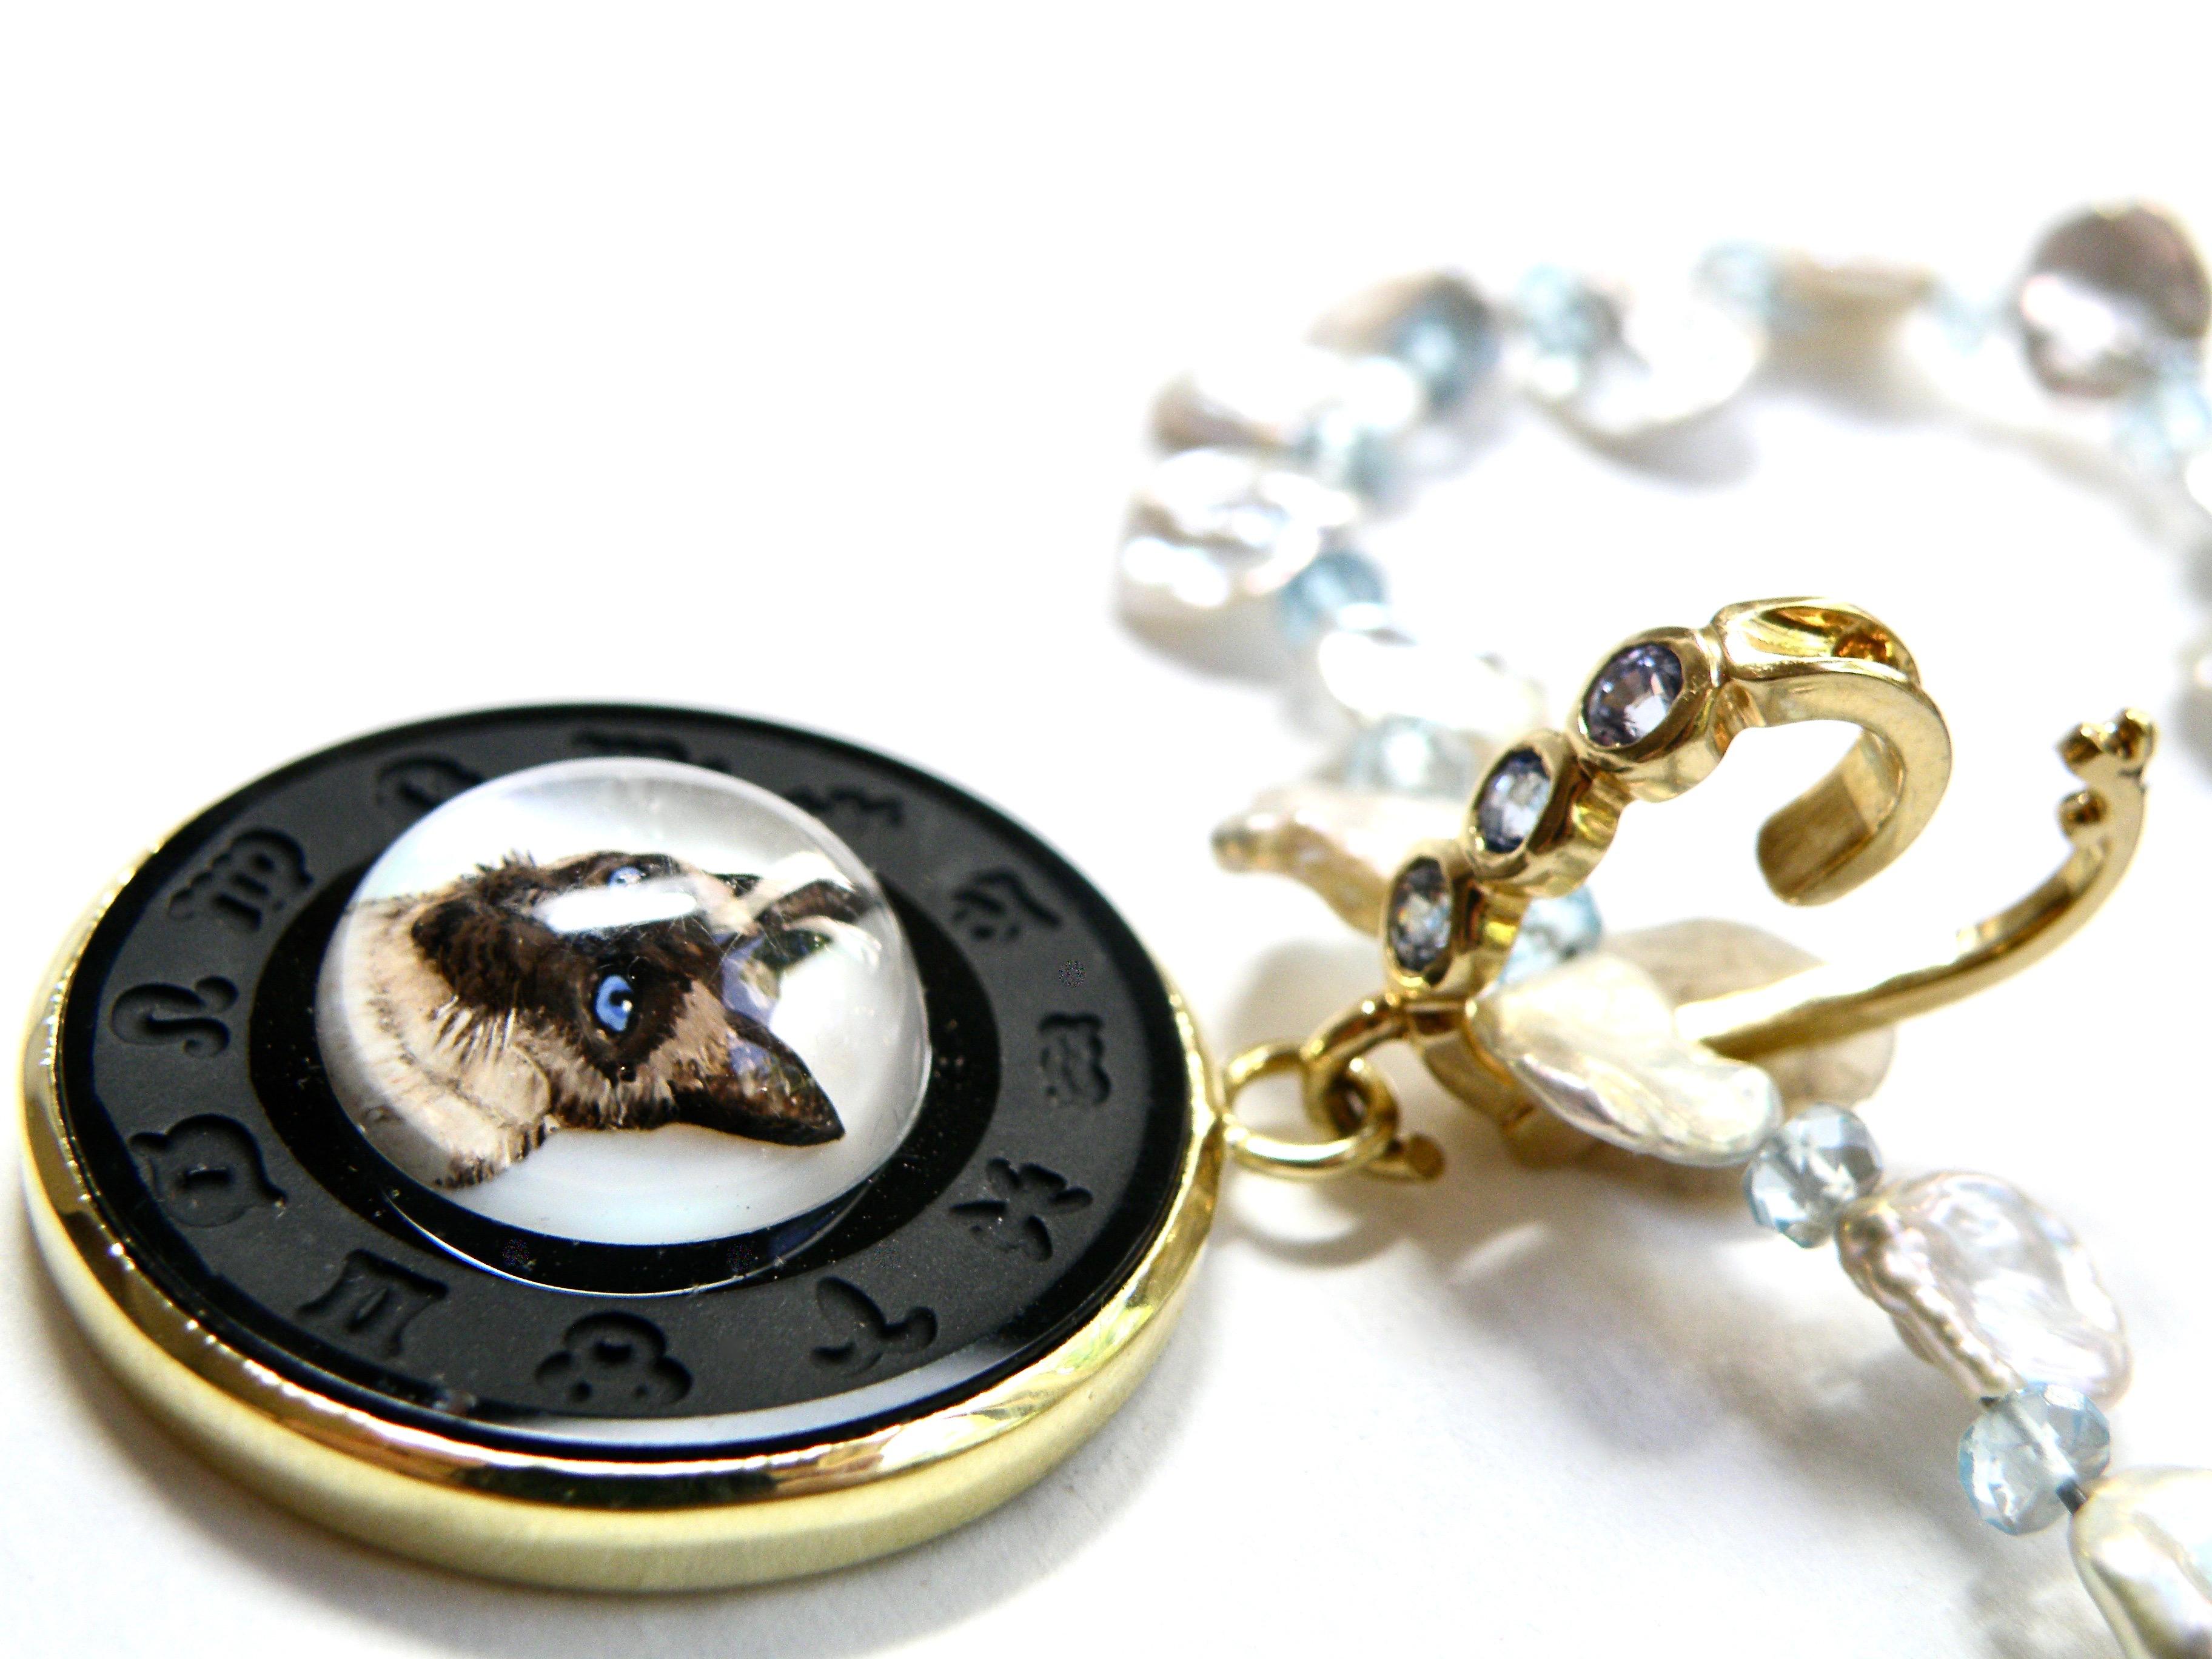 18k gold bezeled reversable crystal carving of a siamese cat framed in unique black onyx zodiac carving. 30mm round